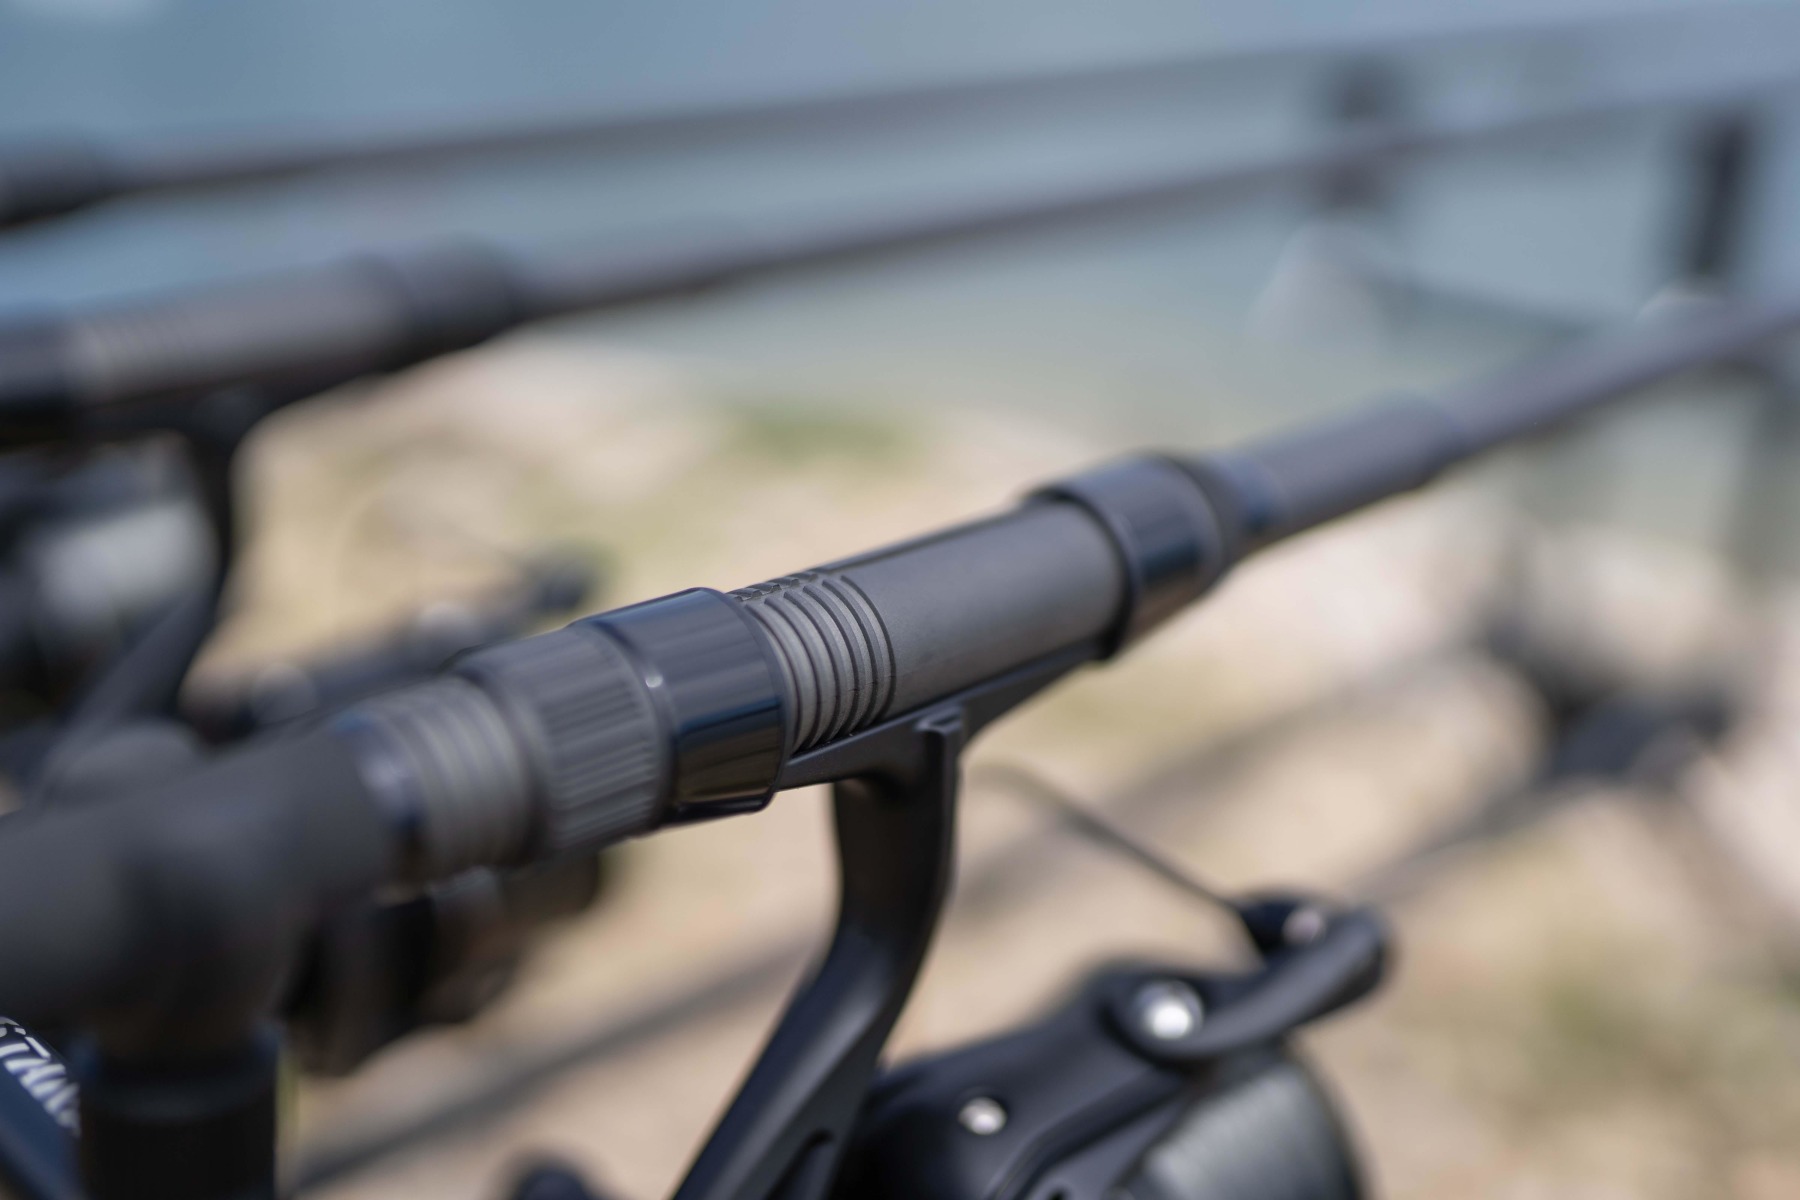 Small but mighty! Sonik's latest short rods - 'Insurgent' - tick